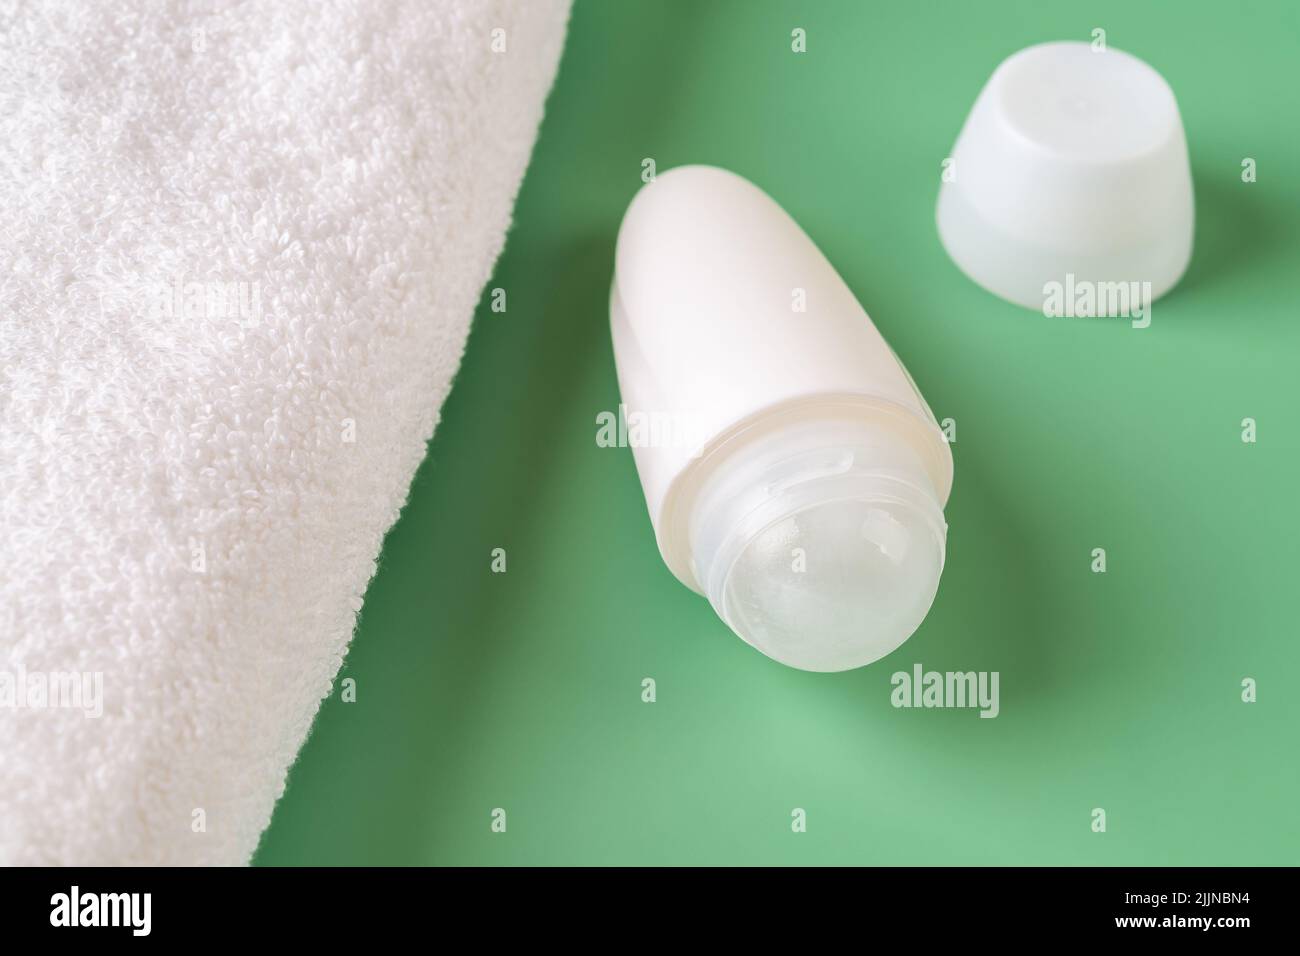 Open roll on antiperspirant deodorant and white bath towel over green background. Body care, toiletries, purity and personal hygiene items concepts. Stock Photo